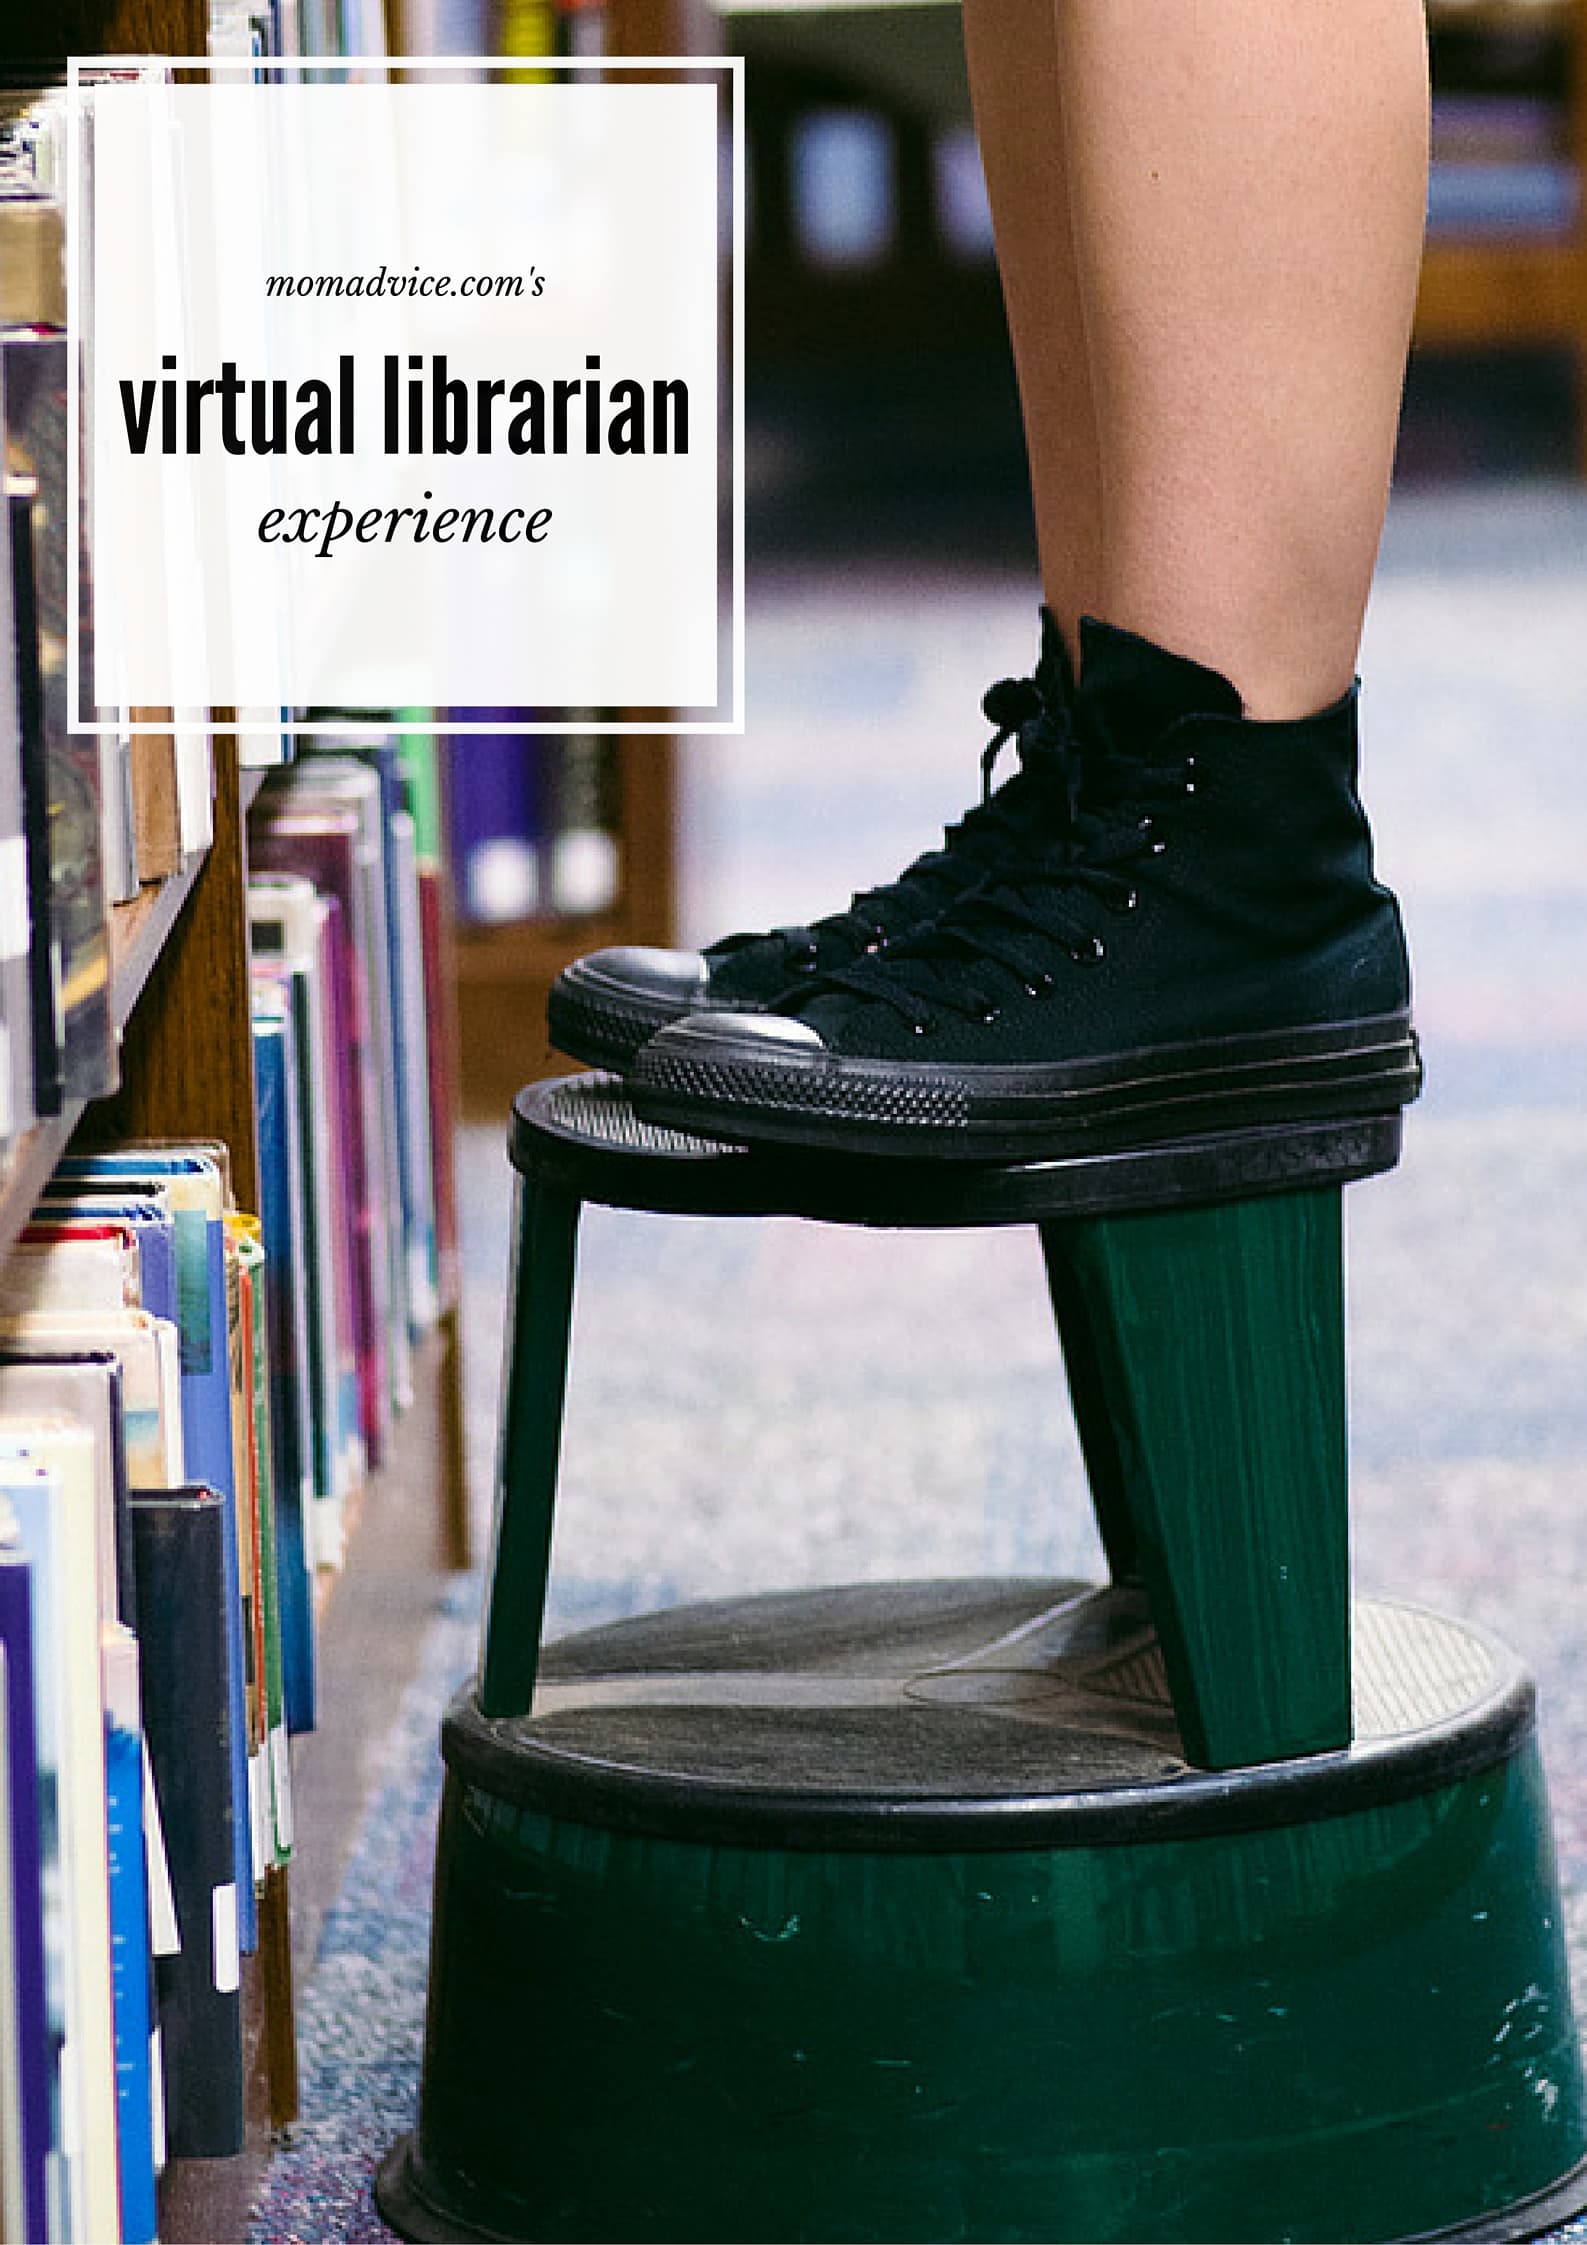 The Virtual Librarian Experience: Fast Paced For A Patterson ...